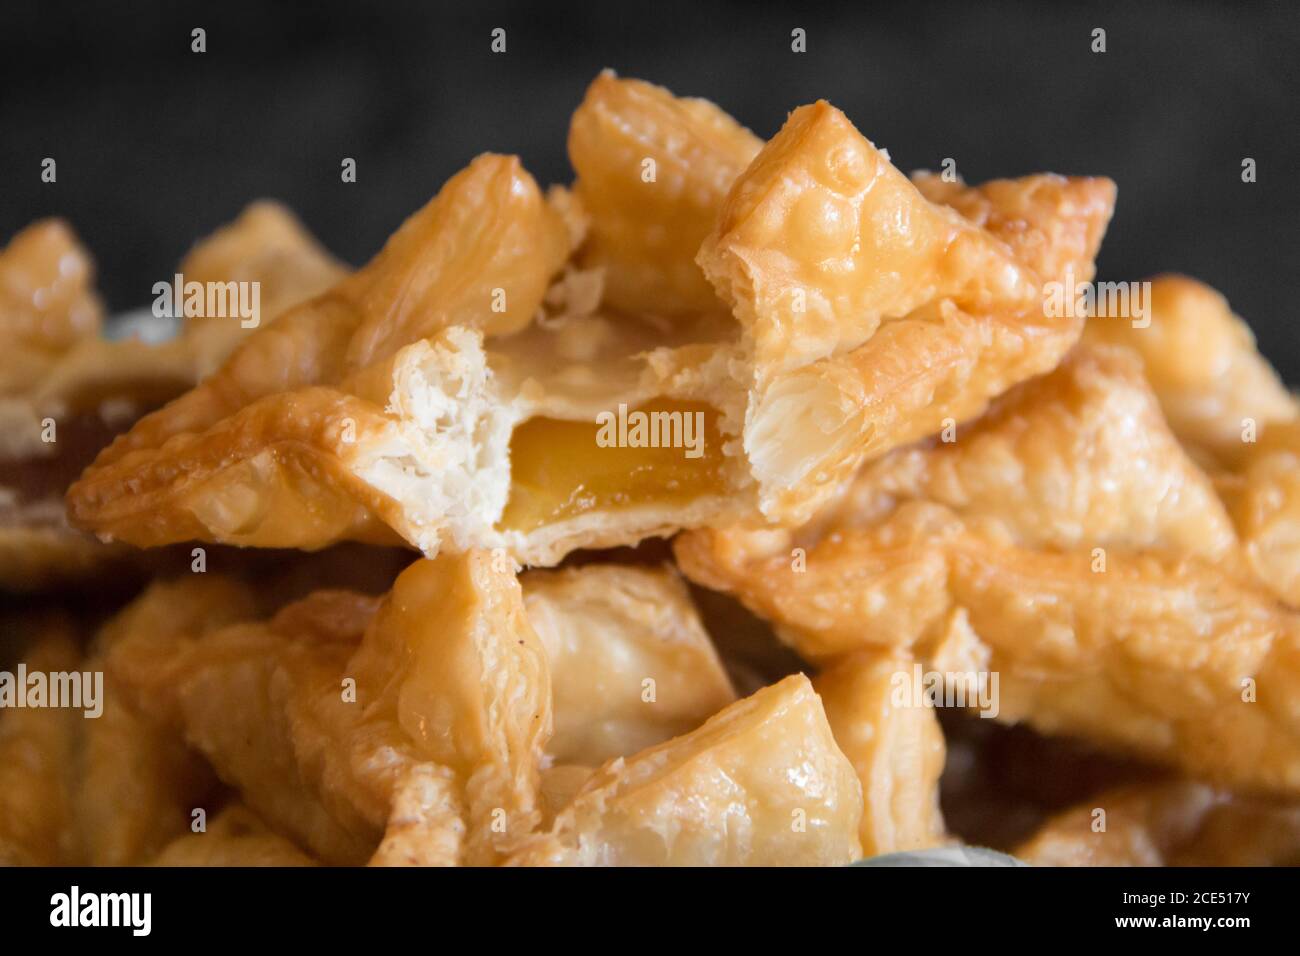 fried pastry with quince and batata typical of south america gastronomy Stock Photo